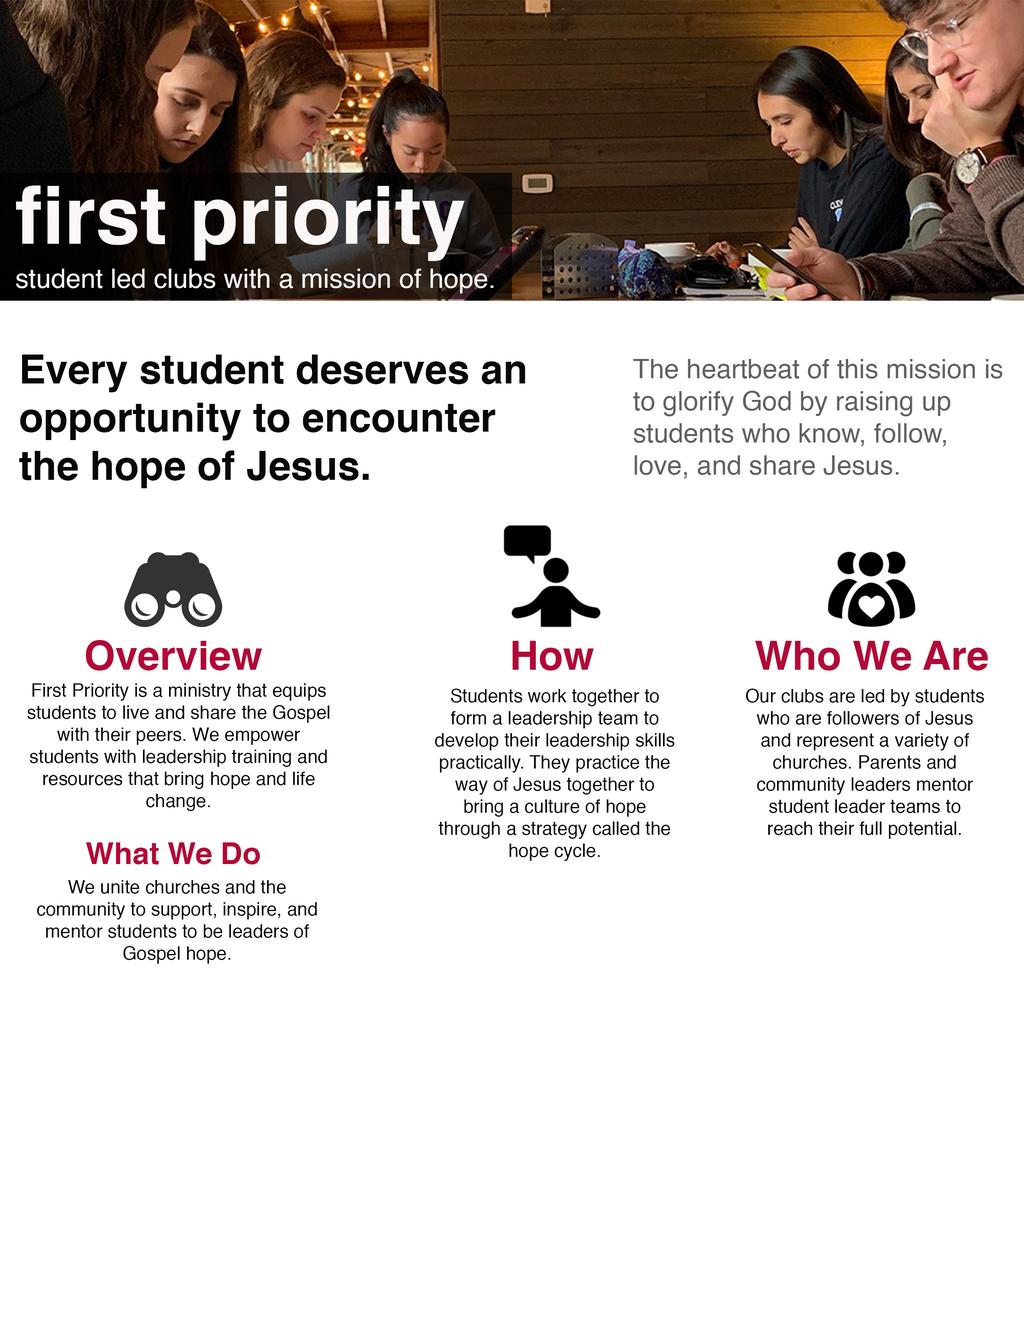 MISSION Vision: The hope of Christ in every student. Organizational Mission: To unite the community & churches to support students in their efforts to share the gospel at school.